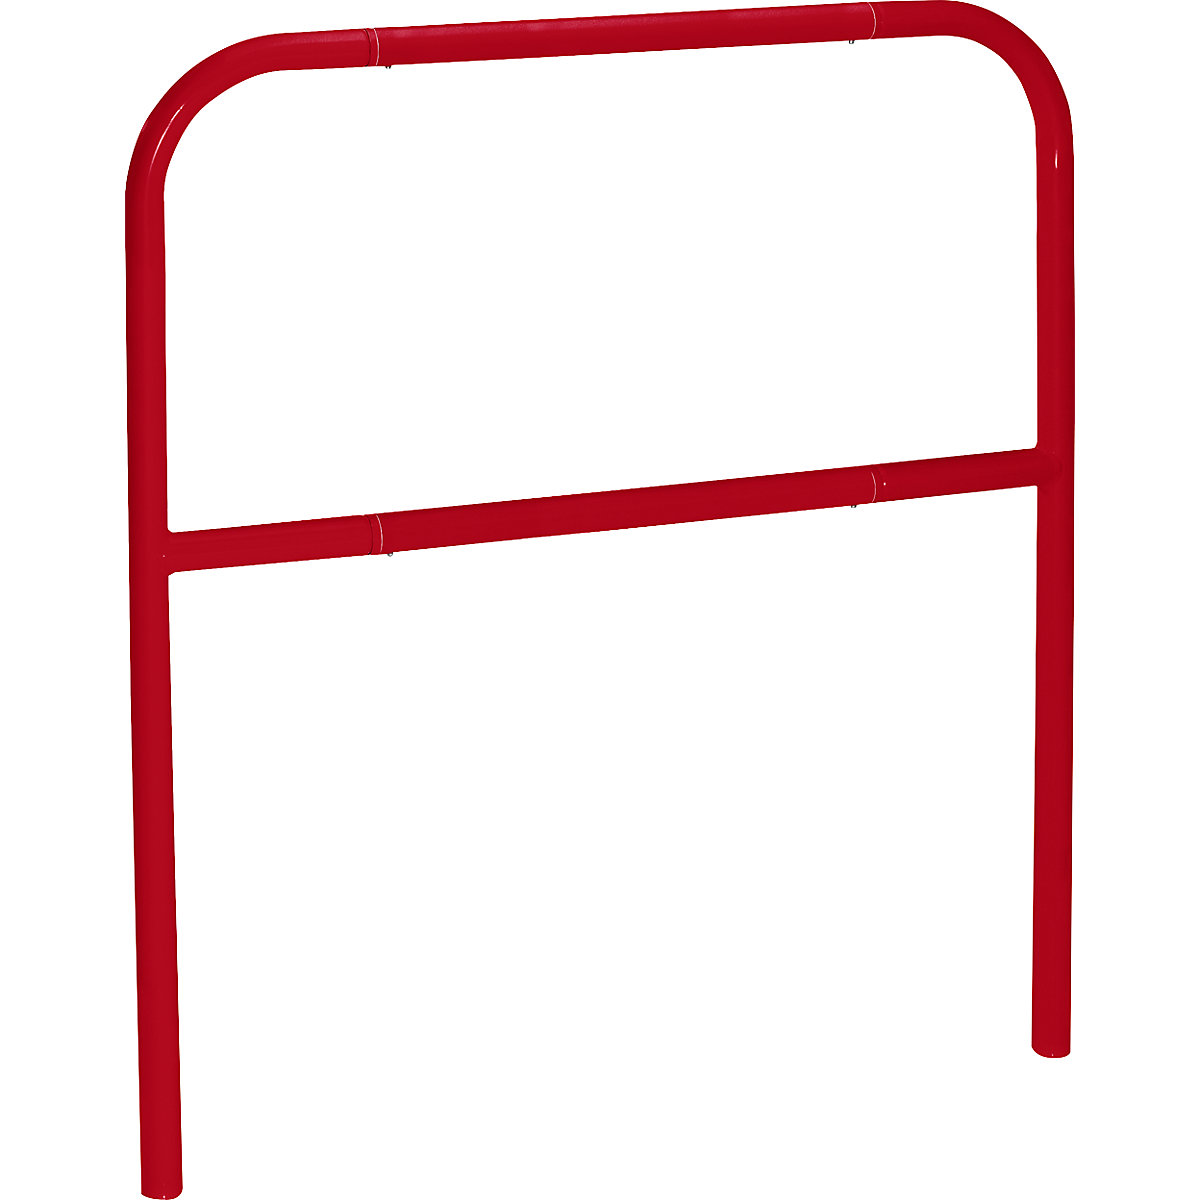 Crash protection bar, for setting in concrete, width 1000 mm, flame red-16